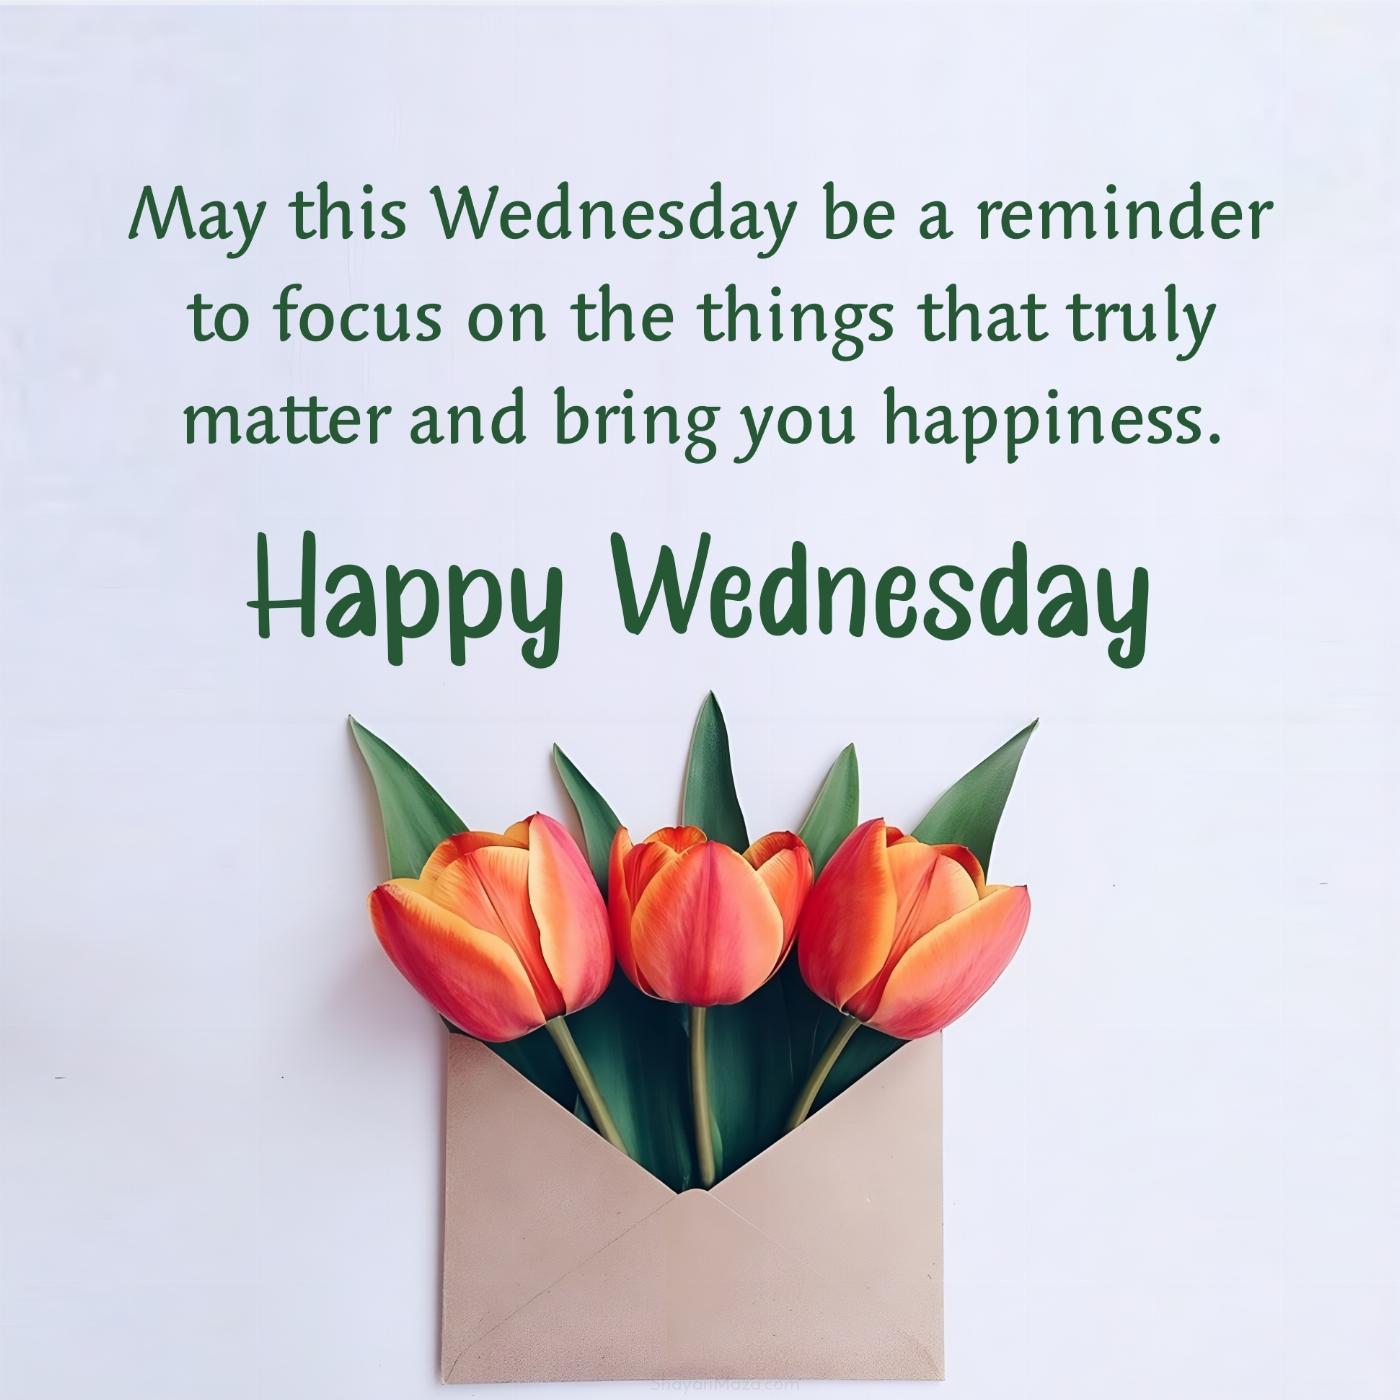 May this Wednesday be a reminder to focus